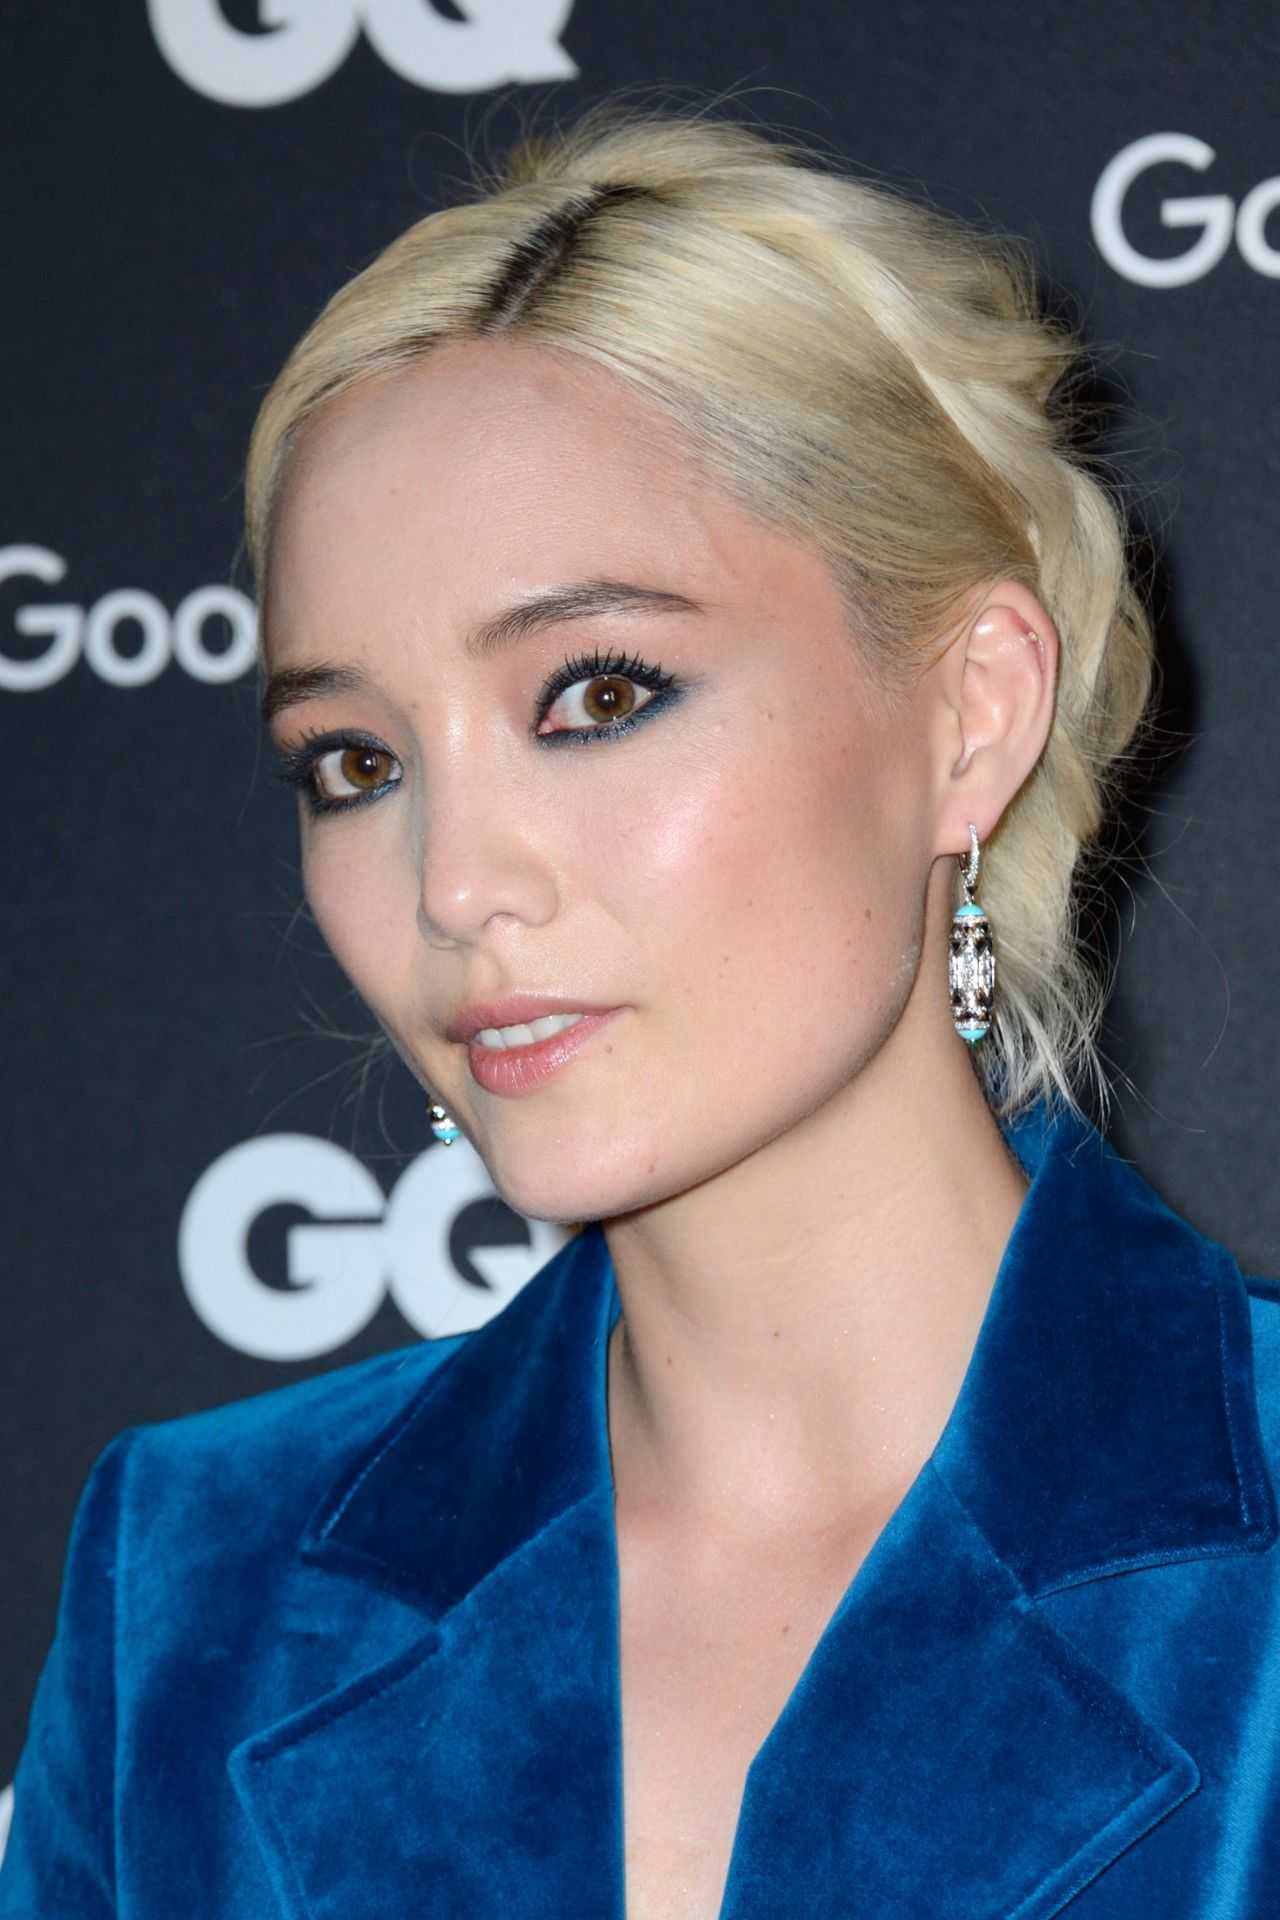 70+ Hot Pictures Of Pom Klementieff Who Plays Mantis In Marvel Cinematic Universe 130